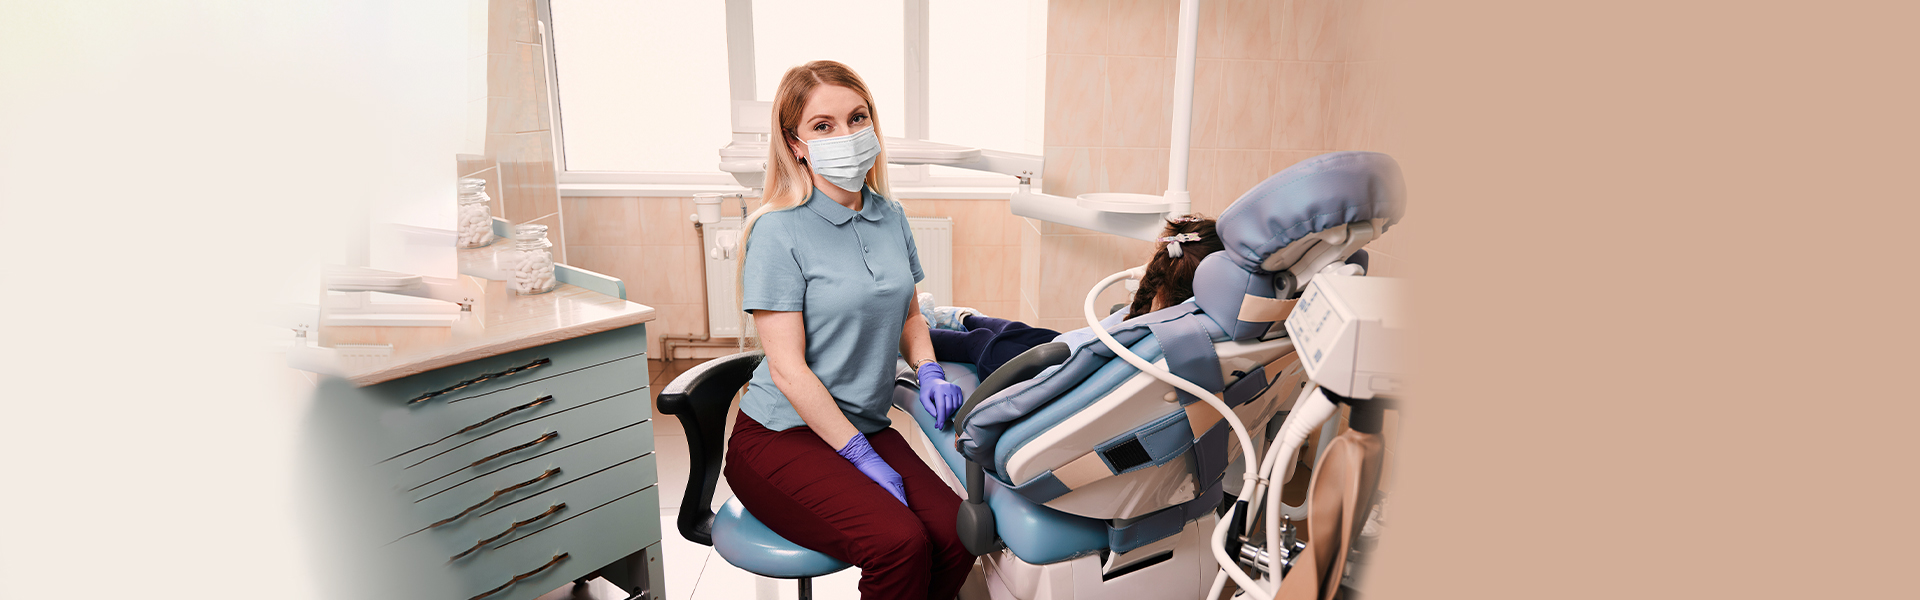 Sedation Dentistry-How to Get the Dental Care You Need Without the Anxiety